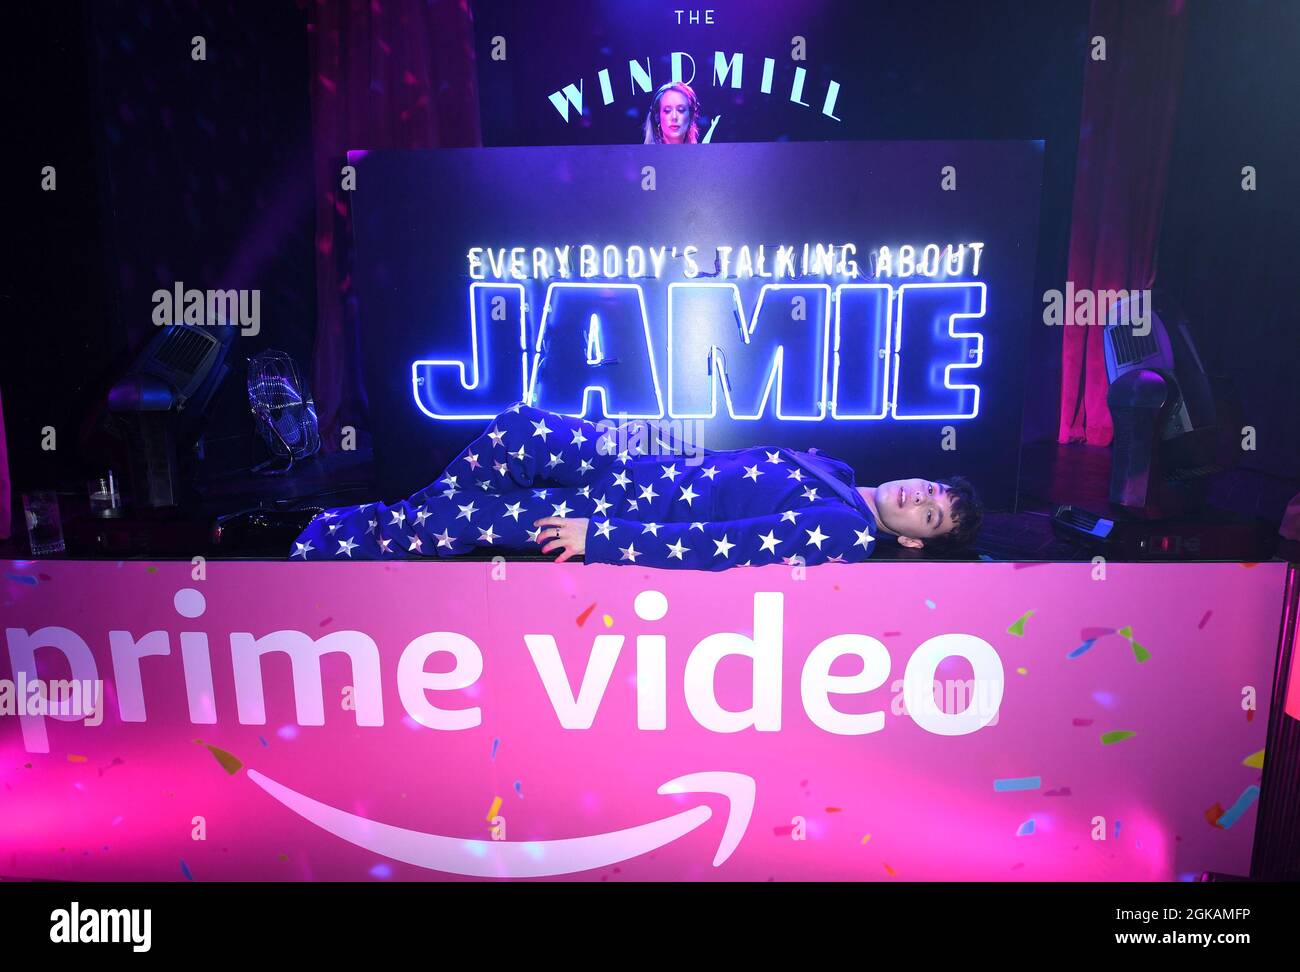 Editorial Use Only Max Harwood Attend The After Party For The World Premiere Of Amazon Prime Video S Everybody S Talking About Jamie At The Windmill Soho London Picture Date Monday September 13 21